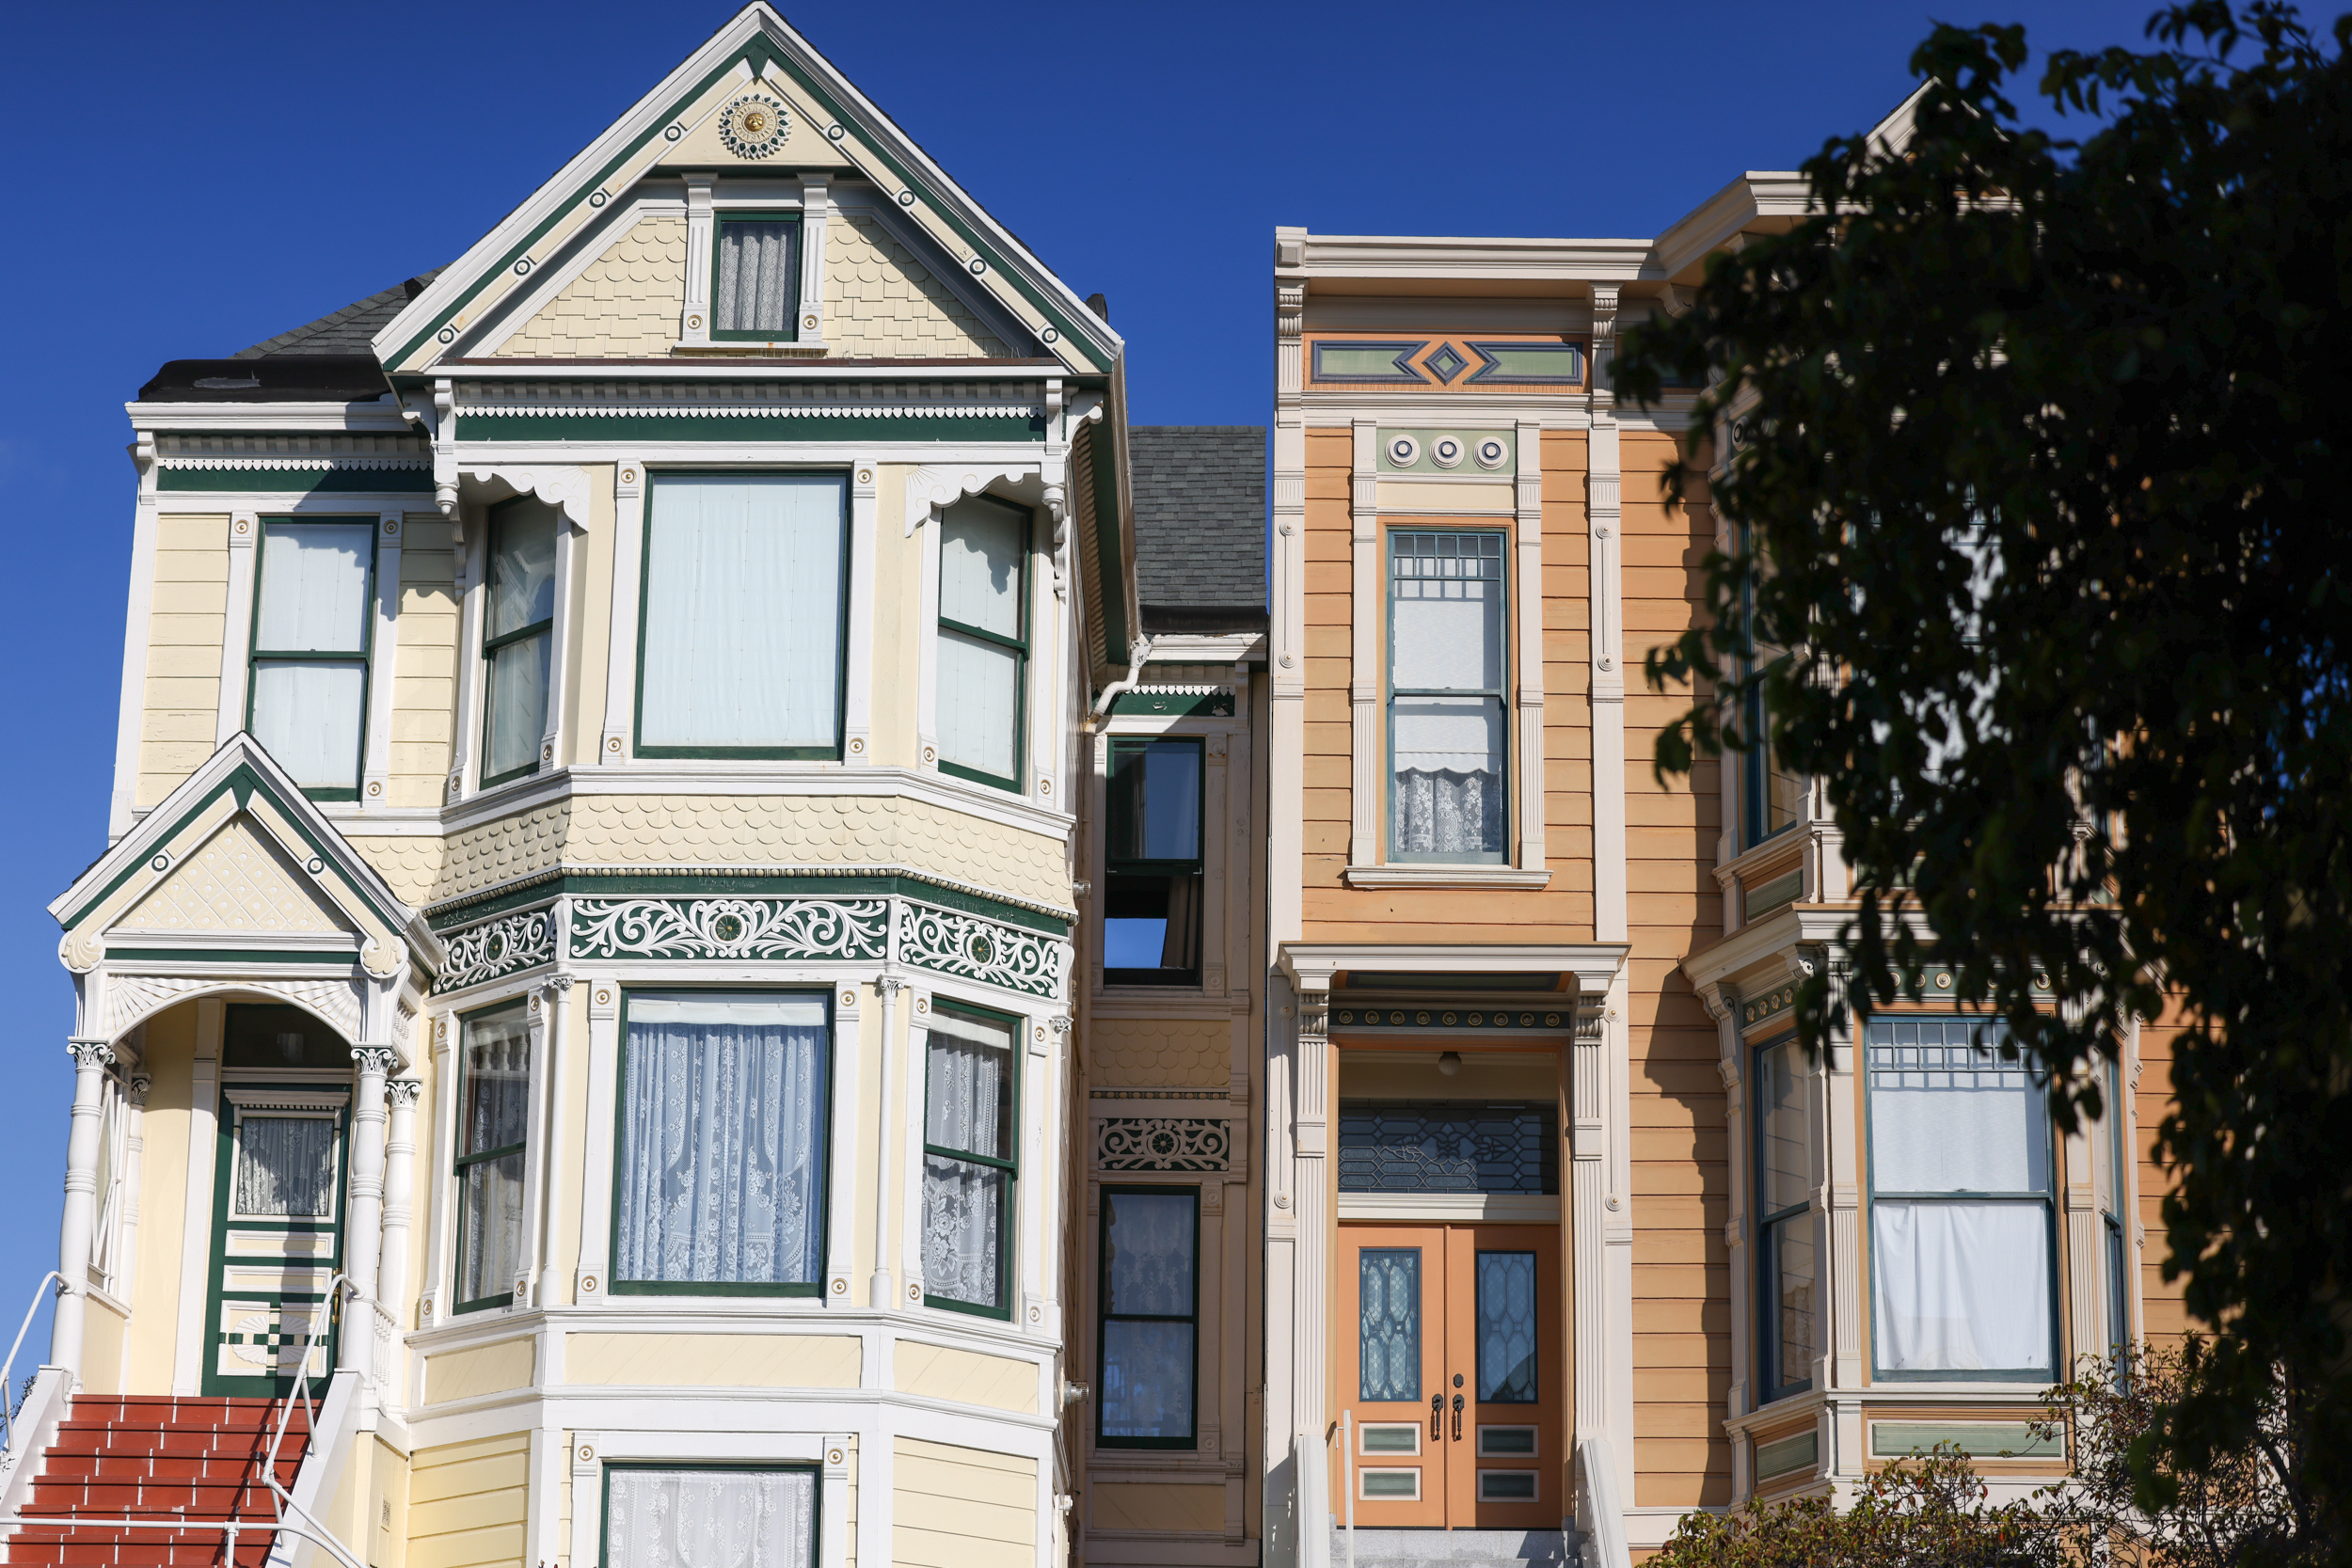 San Francisco home prices drop for the first time in a decade